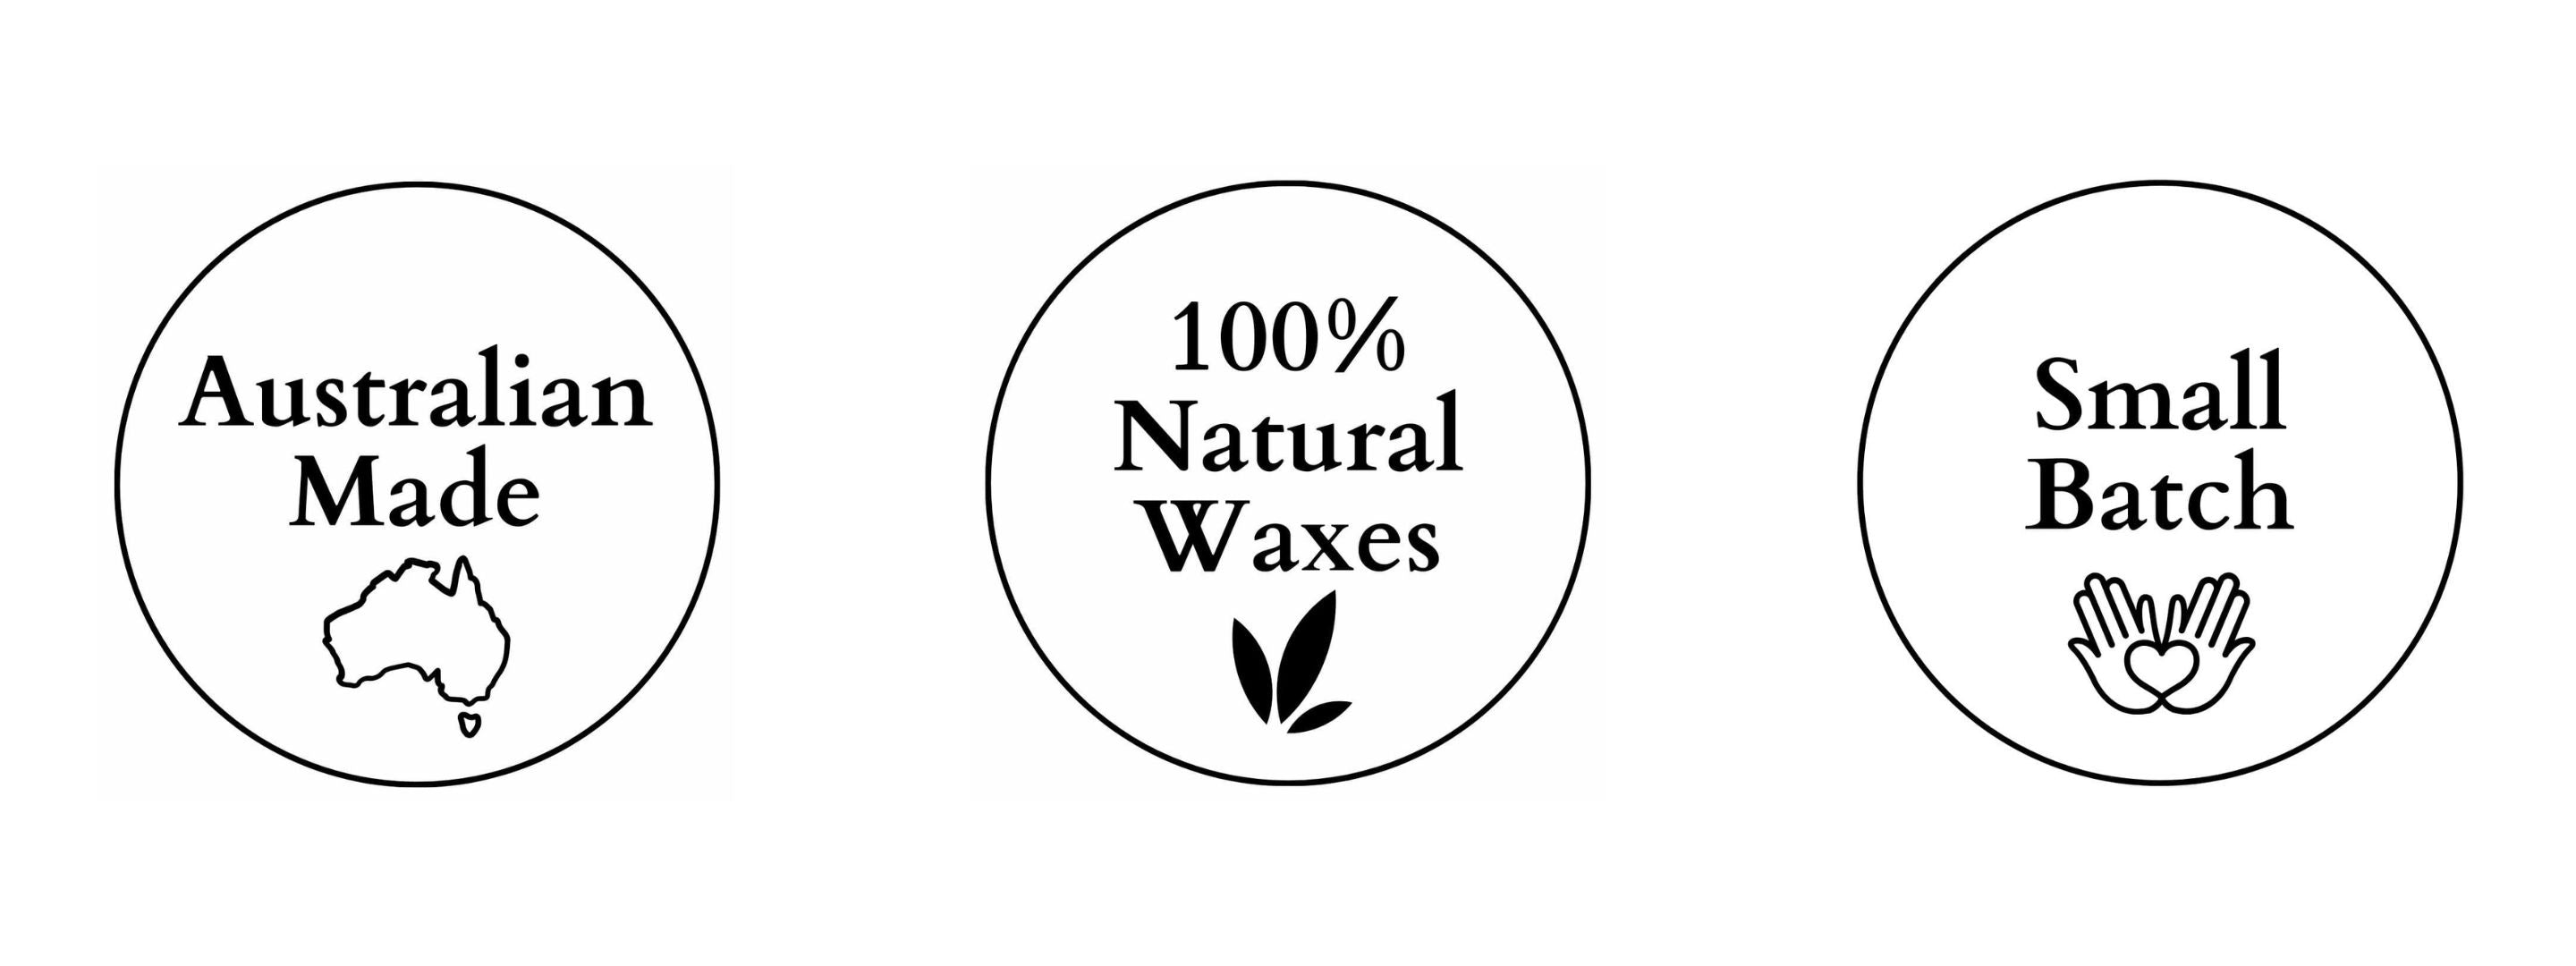 Icons of Australian Made, 100% Natural Waxes and Small Batch